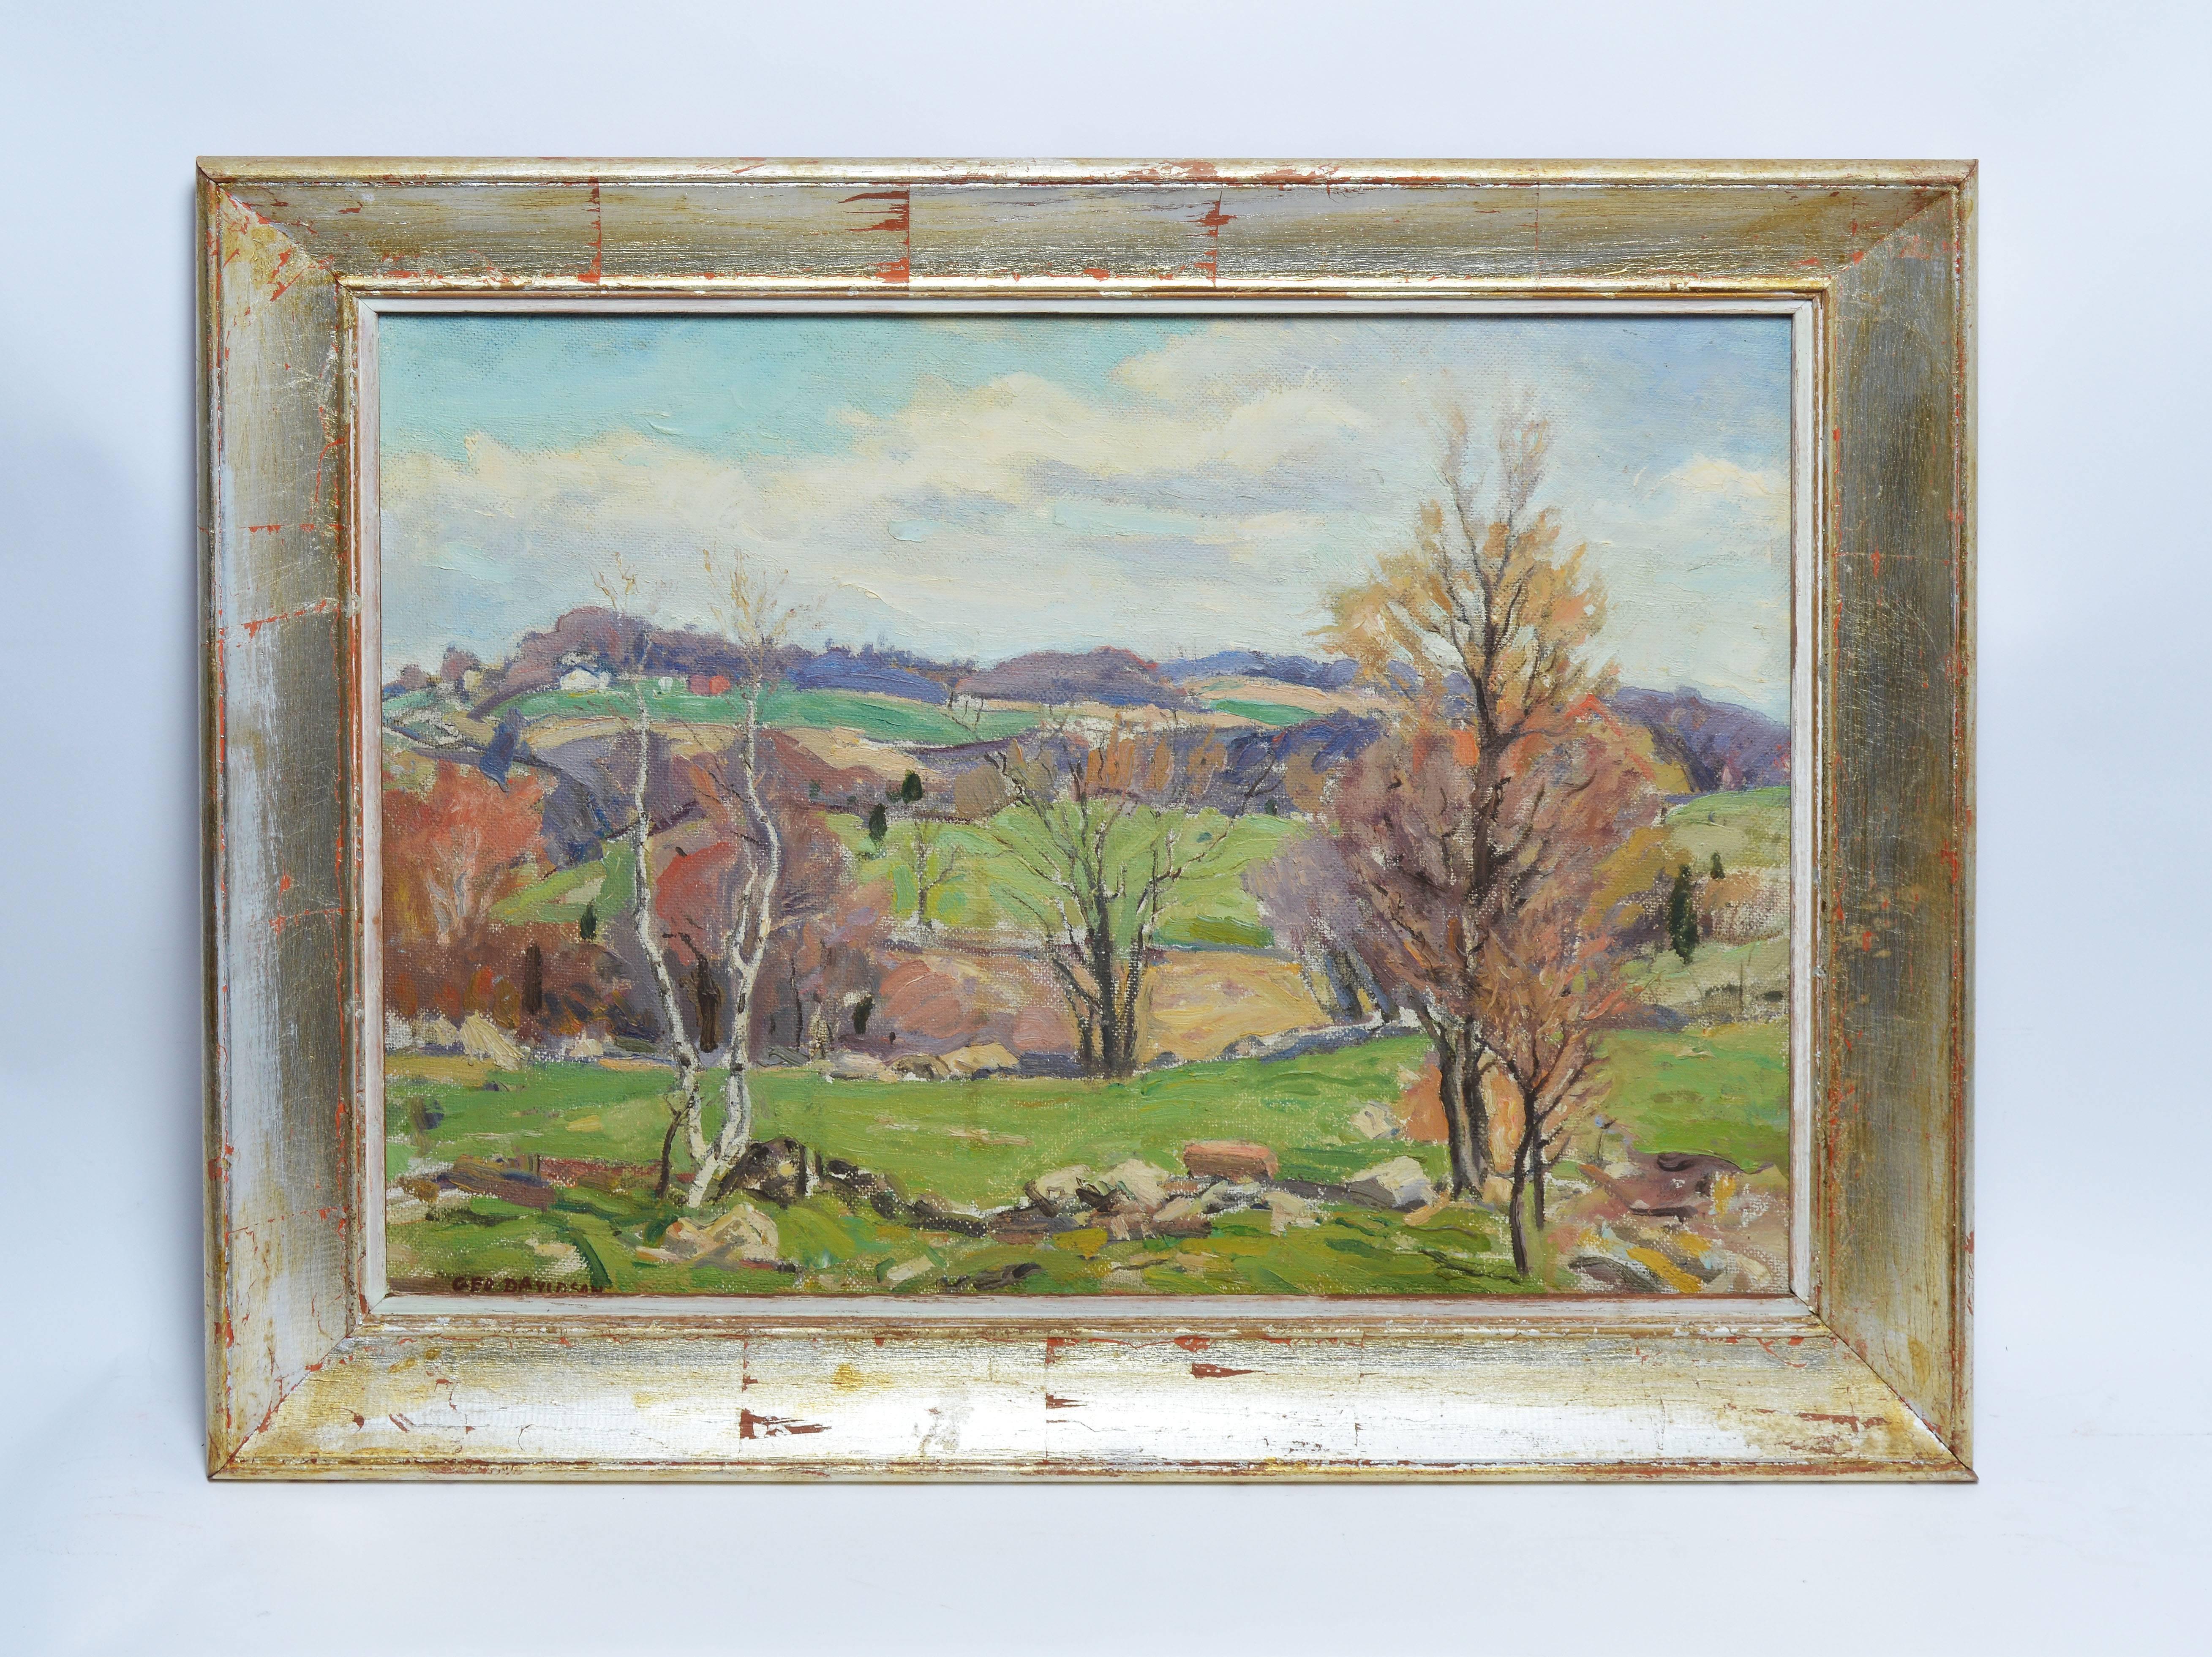 Fall Landscape by George Davidson  - Painting by George Davidson b.1889